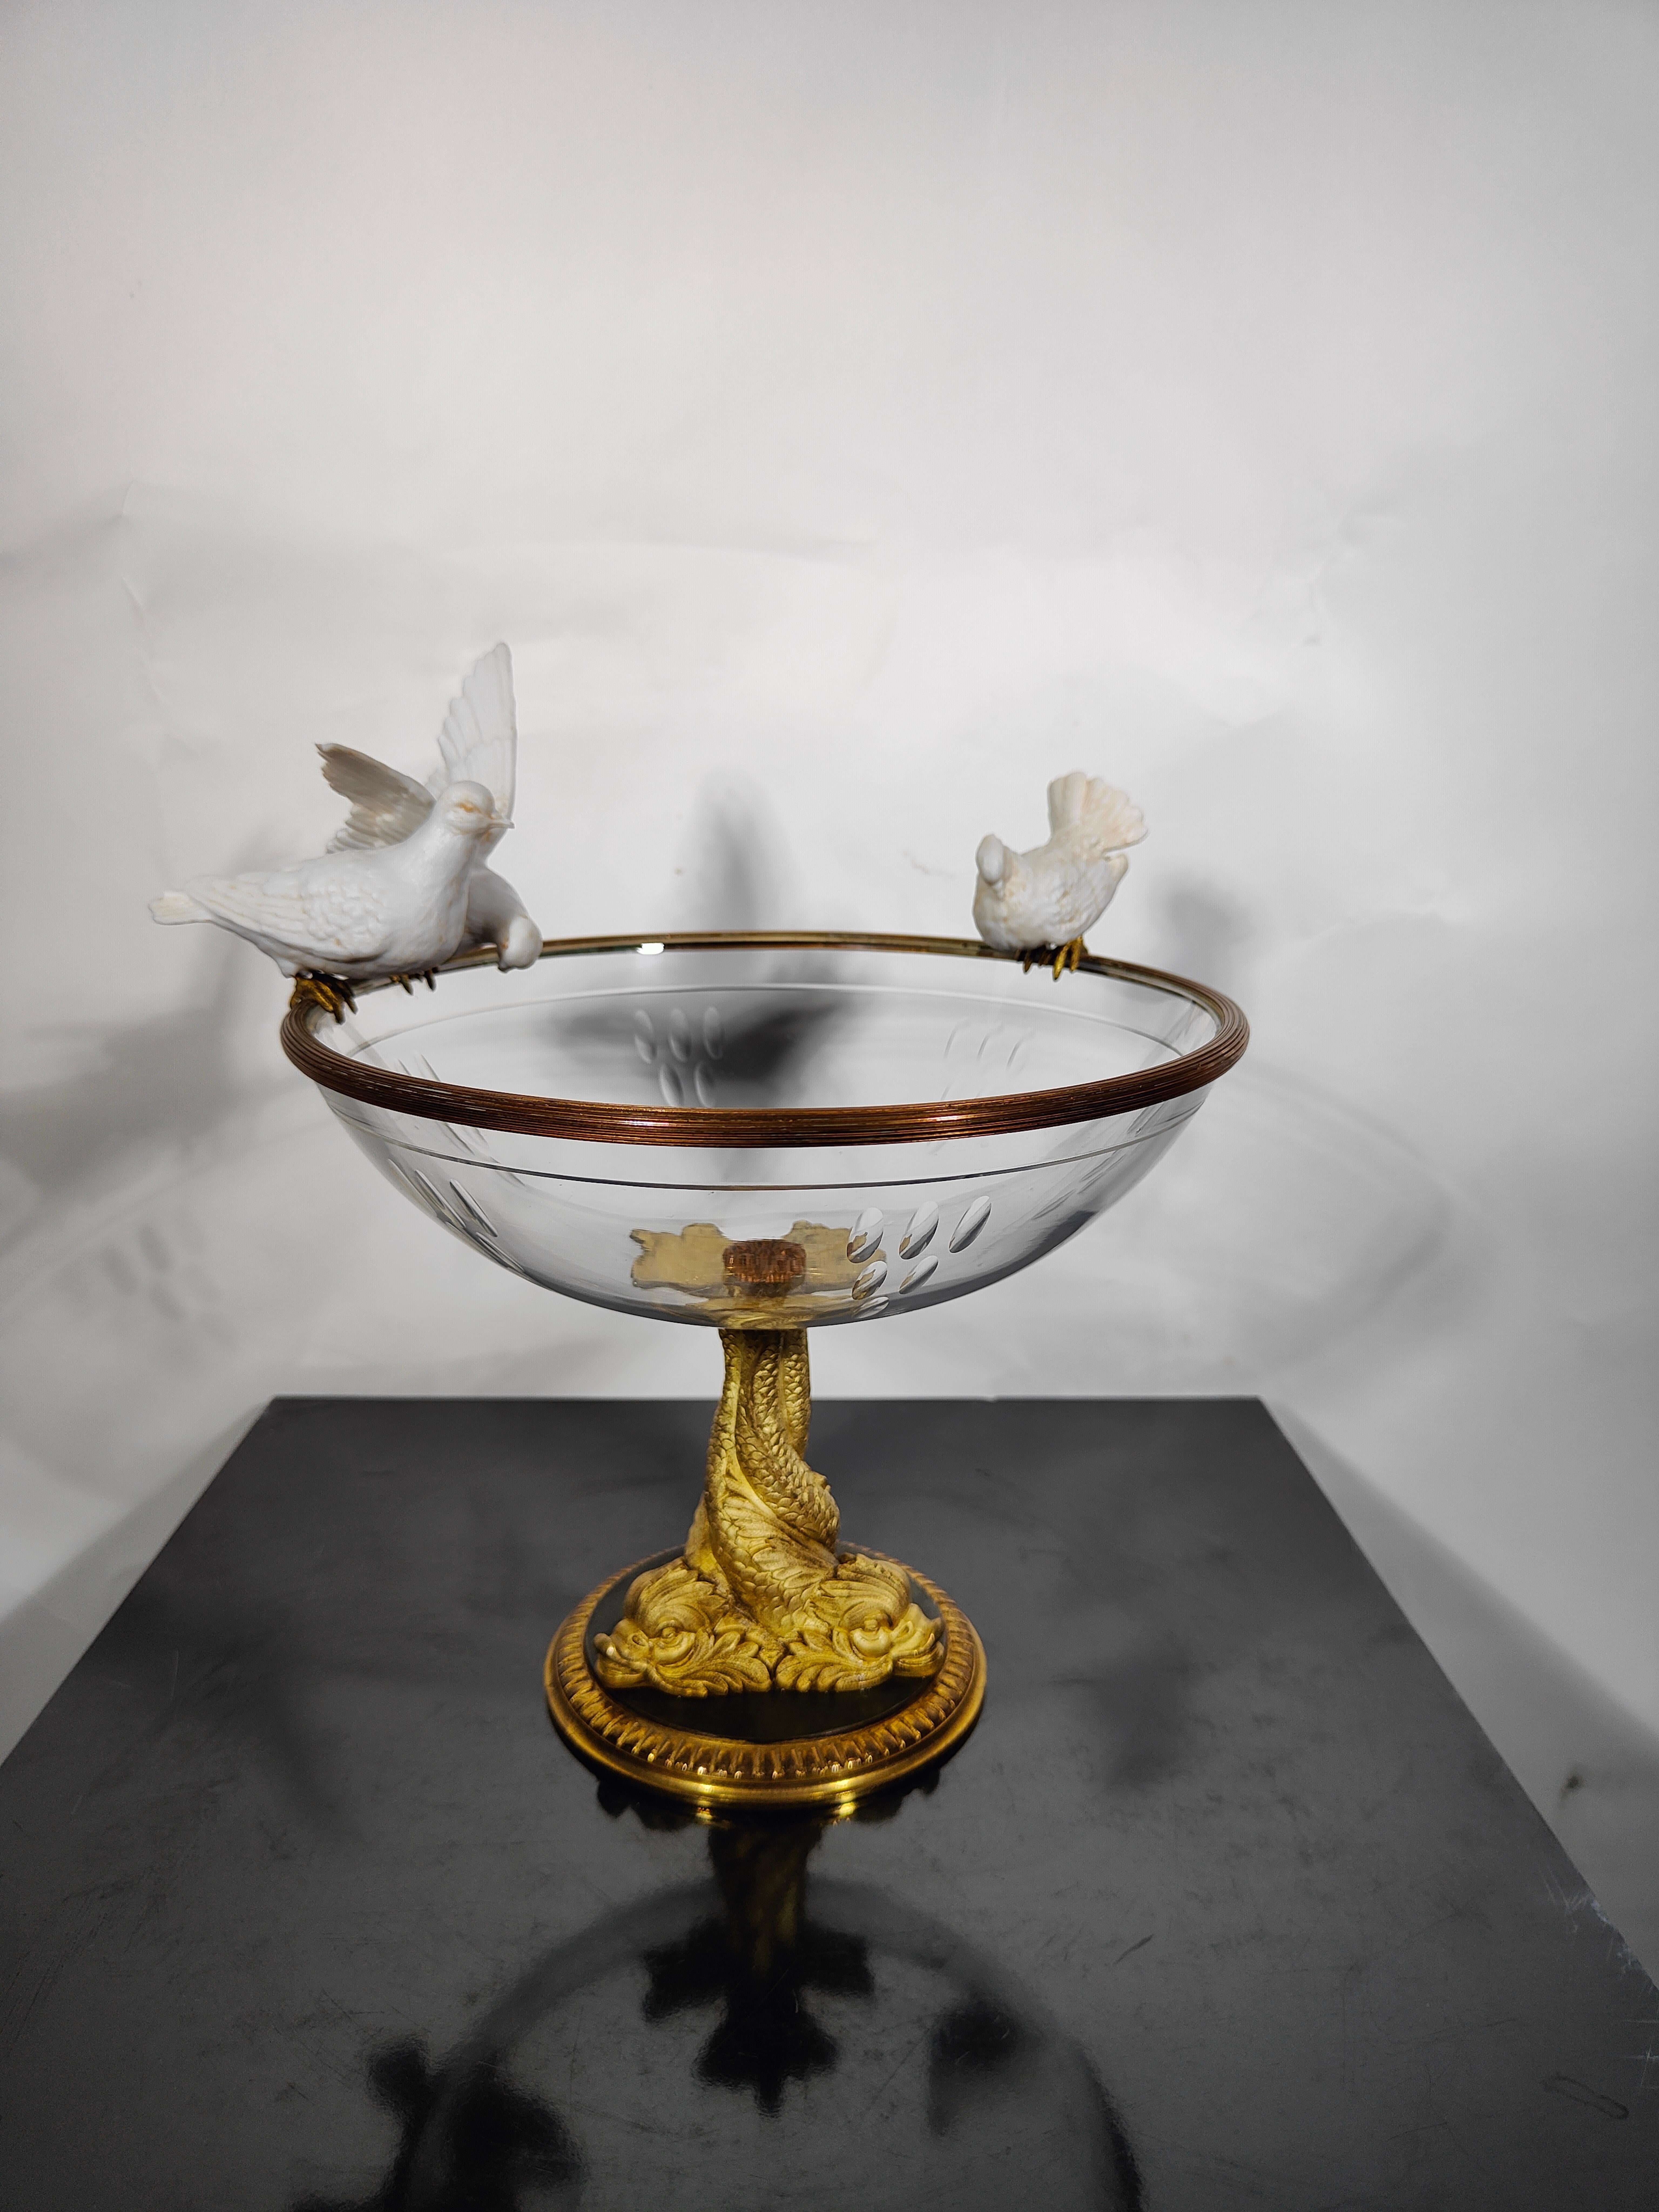 19th century Crystal and porcelain centerpiece.
19th century Crystal and porcelain centerpiece elegant centrepiece simulating a sculpted glass source where 3 porcelain birds rest supported by 3 interfaced dolphins in golden bronze. Measurements: 22